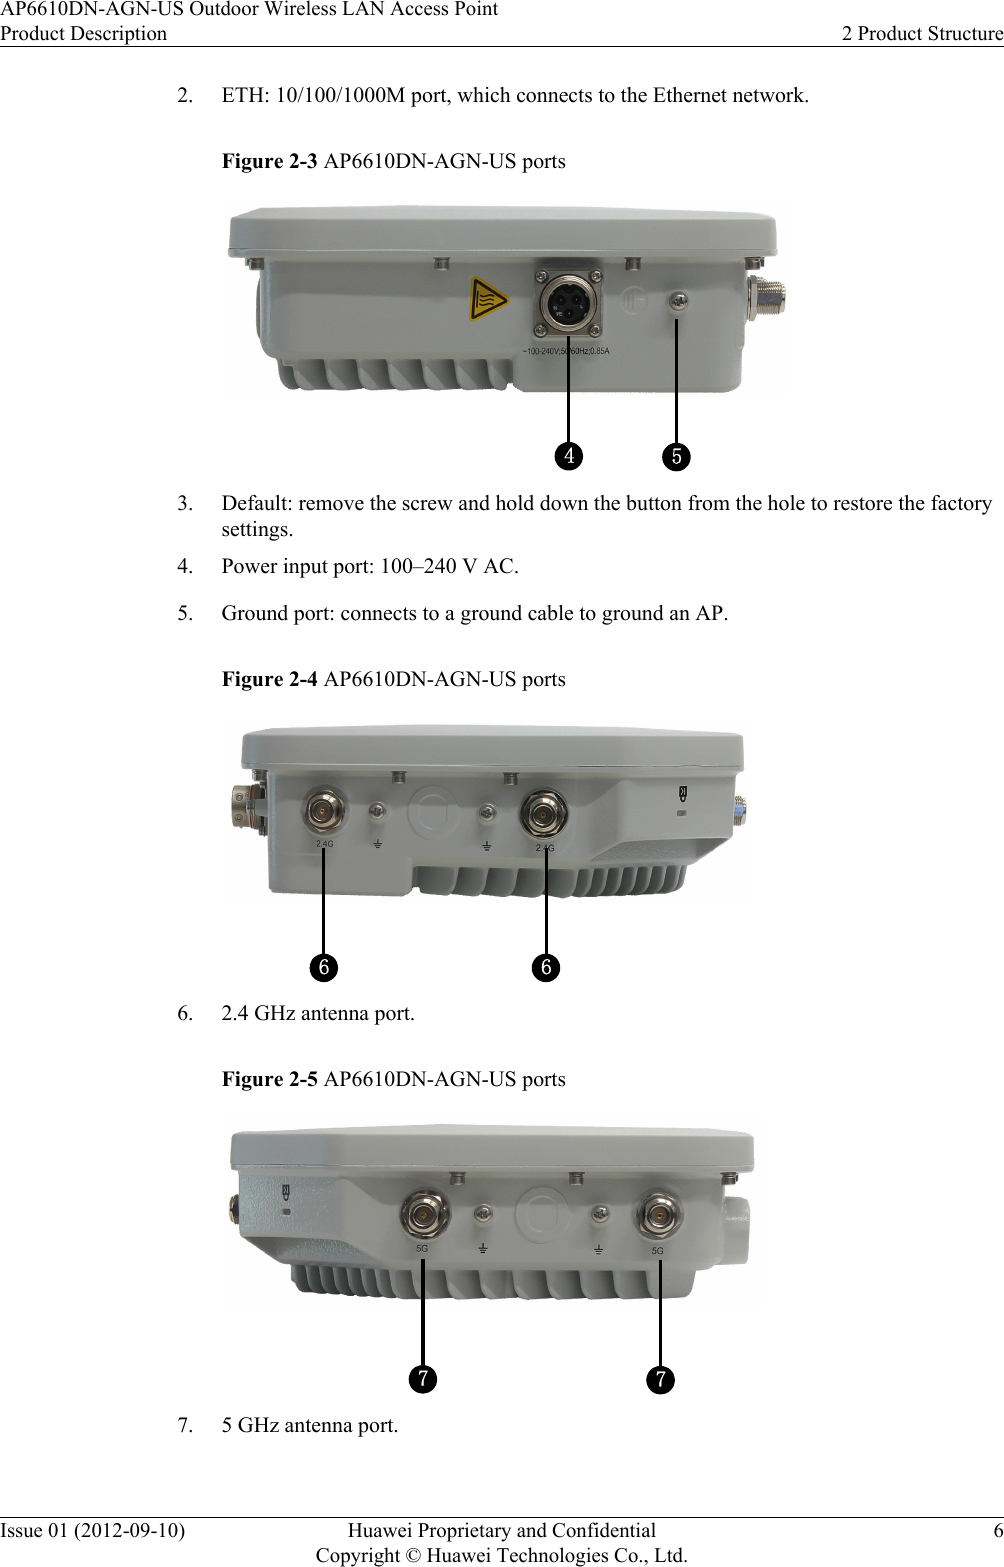 2. ETH: 10/100/1000M port, which connects to the Ethernet network.Figure 2-3 AP6610DN-AGN-US ports543. Default: remove the screw and hold down the button from the hole to restore the factorysettings.4. Power input port: 100–240 V AC.5. Ground port: connects to a ground cable to ground an AP.Figure 2-4 AP6610DN-AGN-US ports6 66. 2.4 GHz antenna port.Figure 2-5 AP6610DN-AGN-US ports777. 5 GHz antenna port.AP6610DN-AGN-US Outdoor Wireless LAN Access PointProduct Description 2 Product StructureIssue 01 (2012-09-10) Huawei Proprietary and ConfidentialCopyright © Huawei Technologies Co., Ltd.6